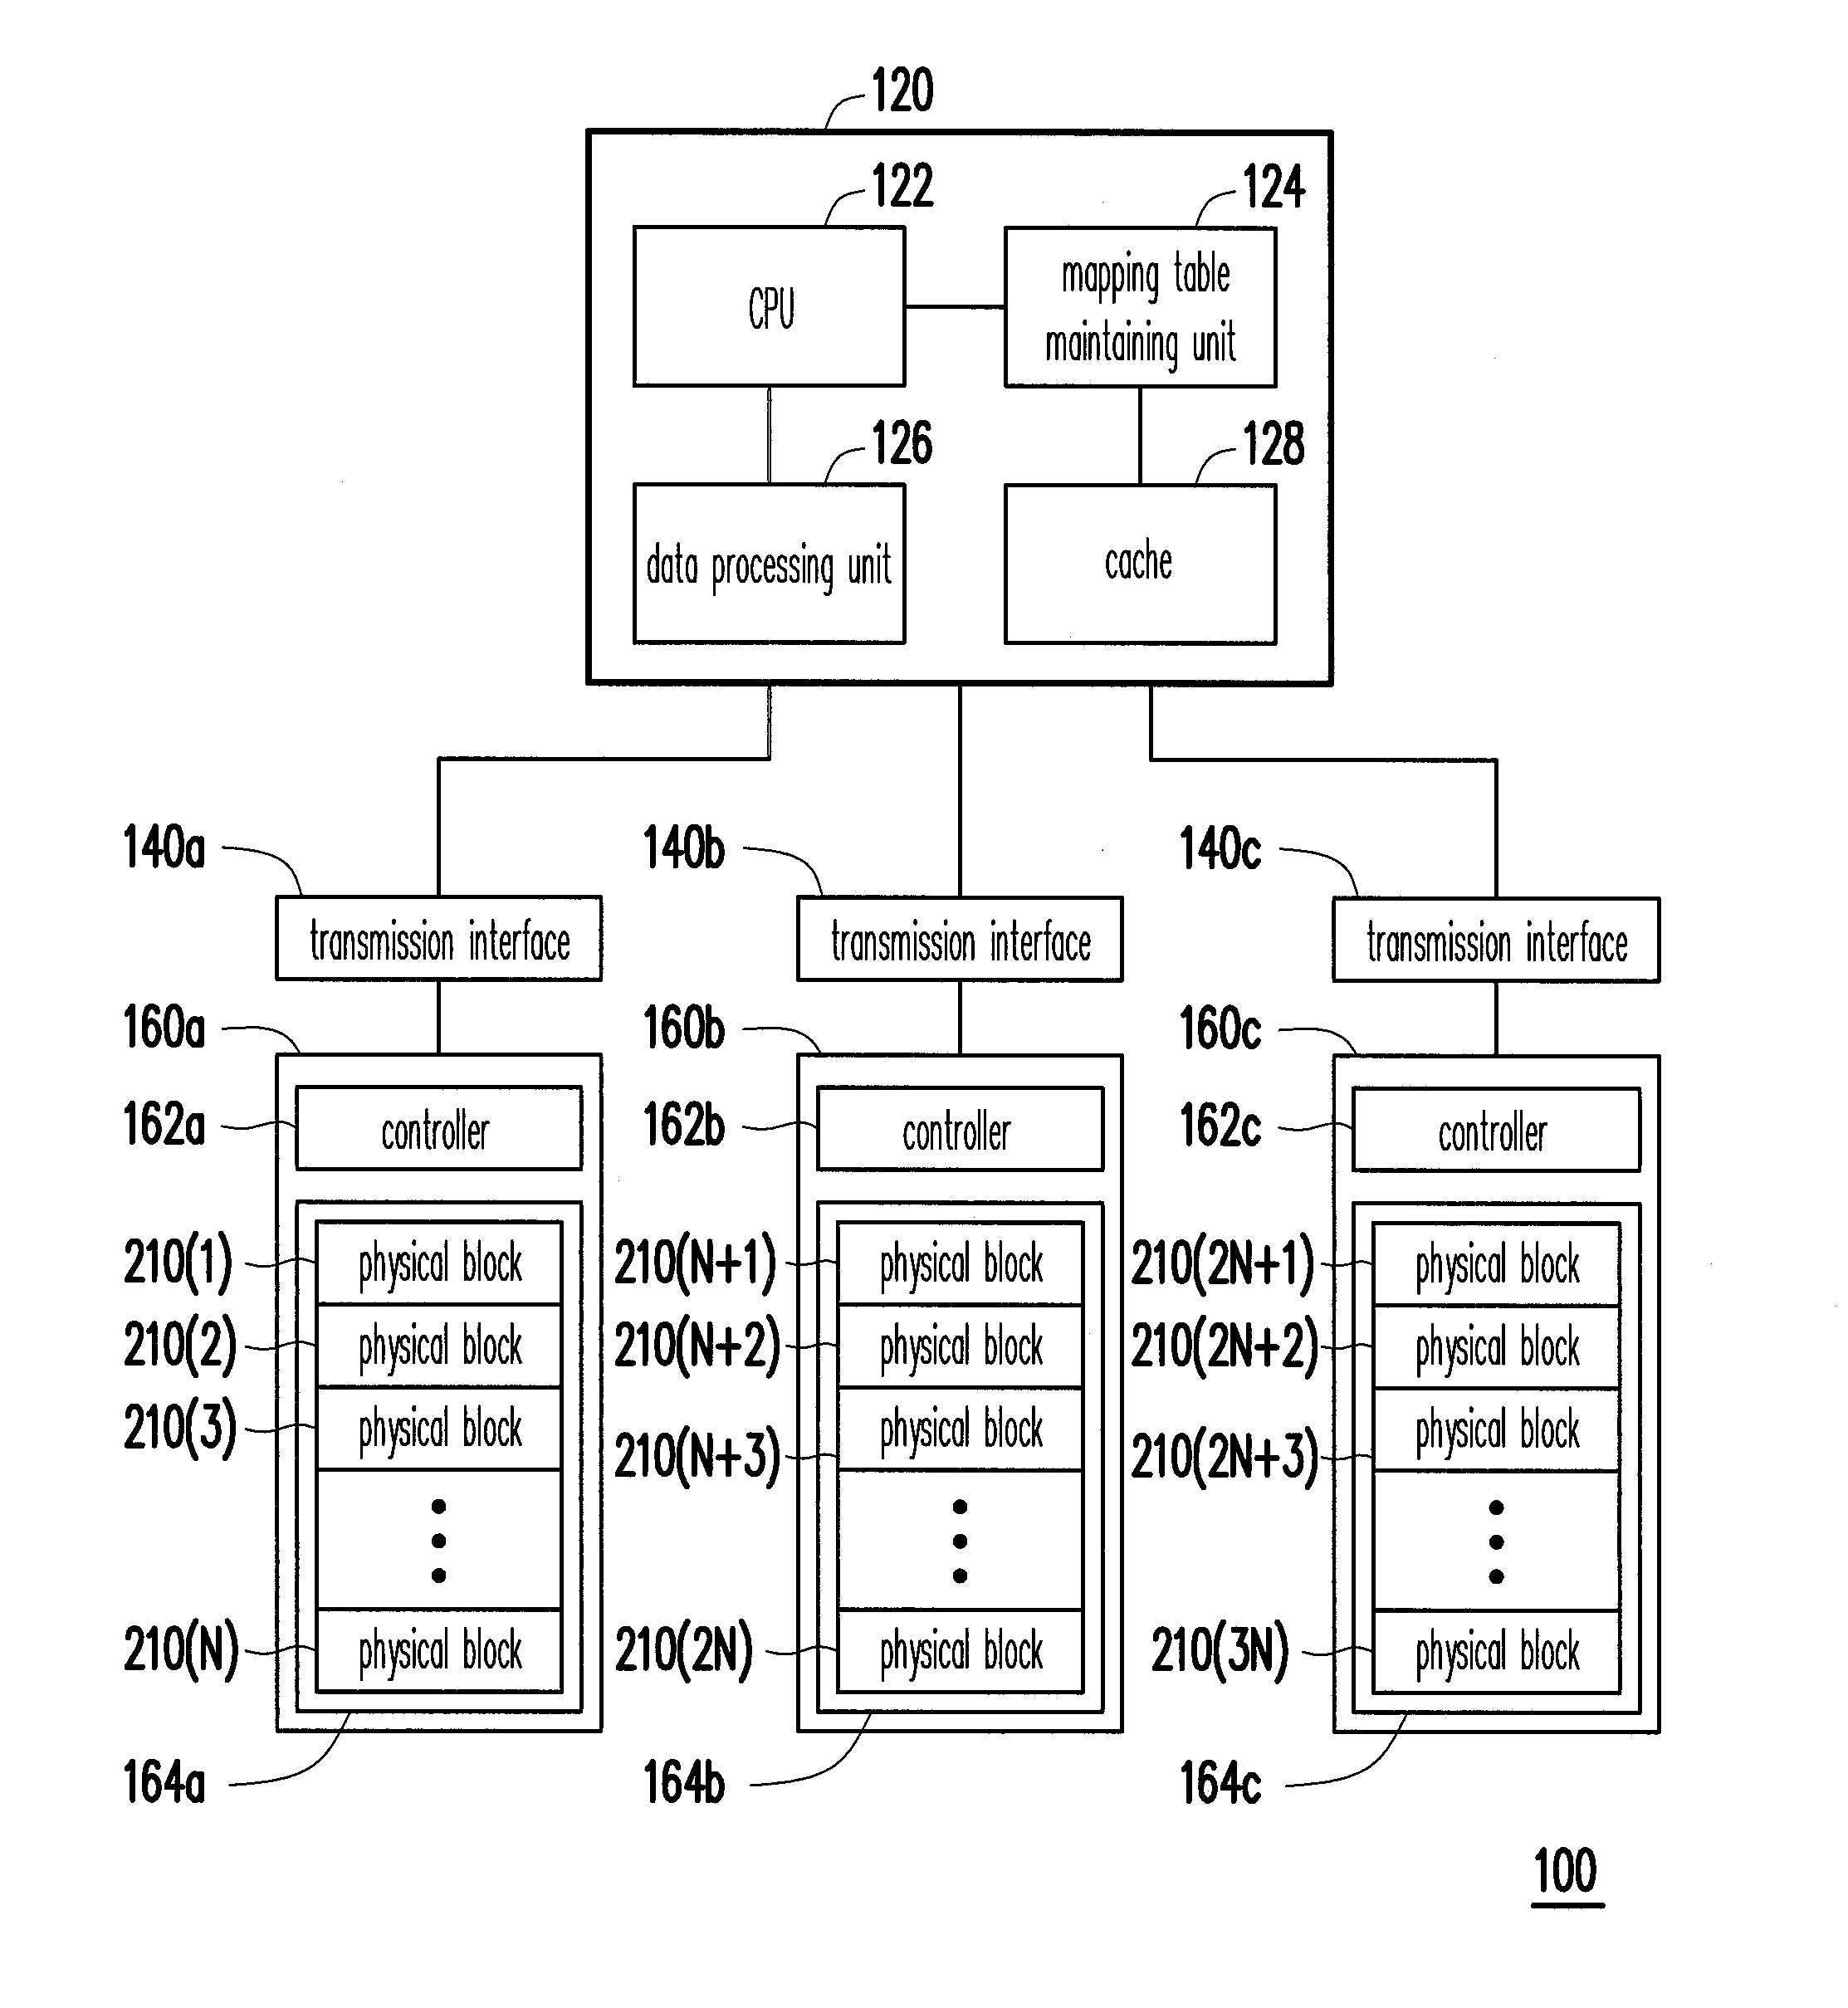 System and method for memory storage